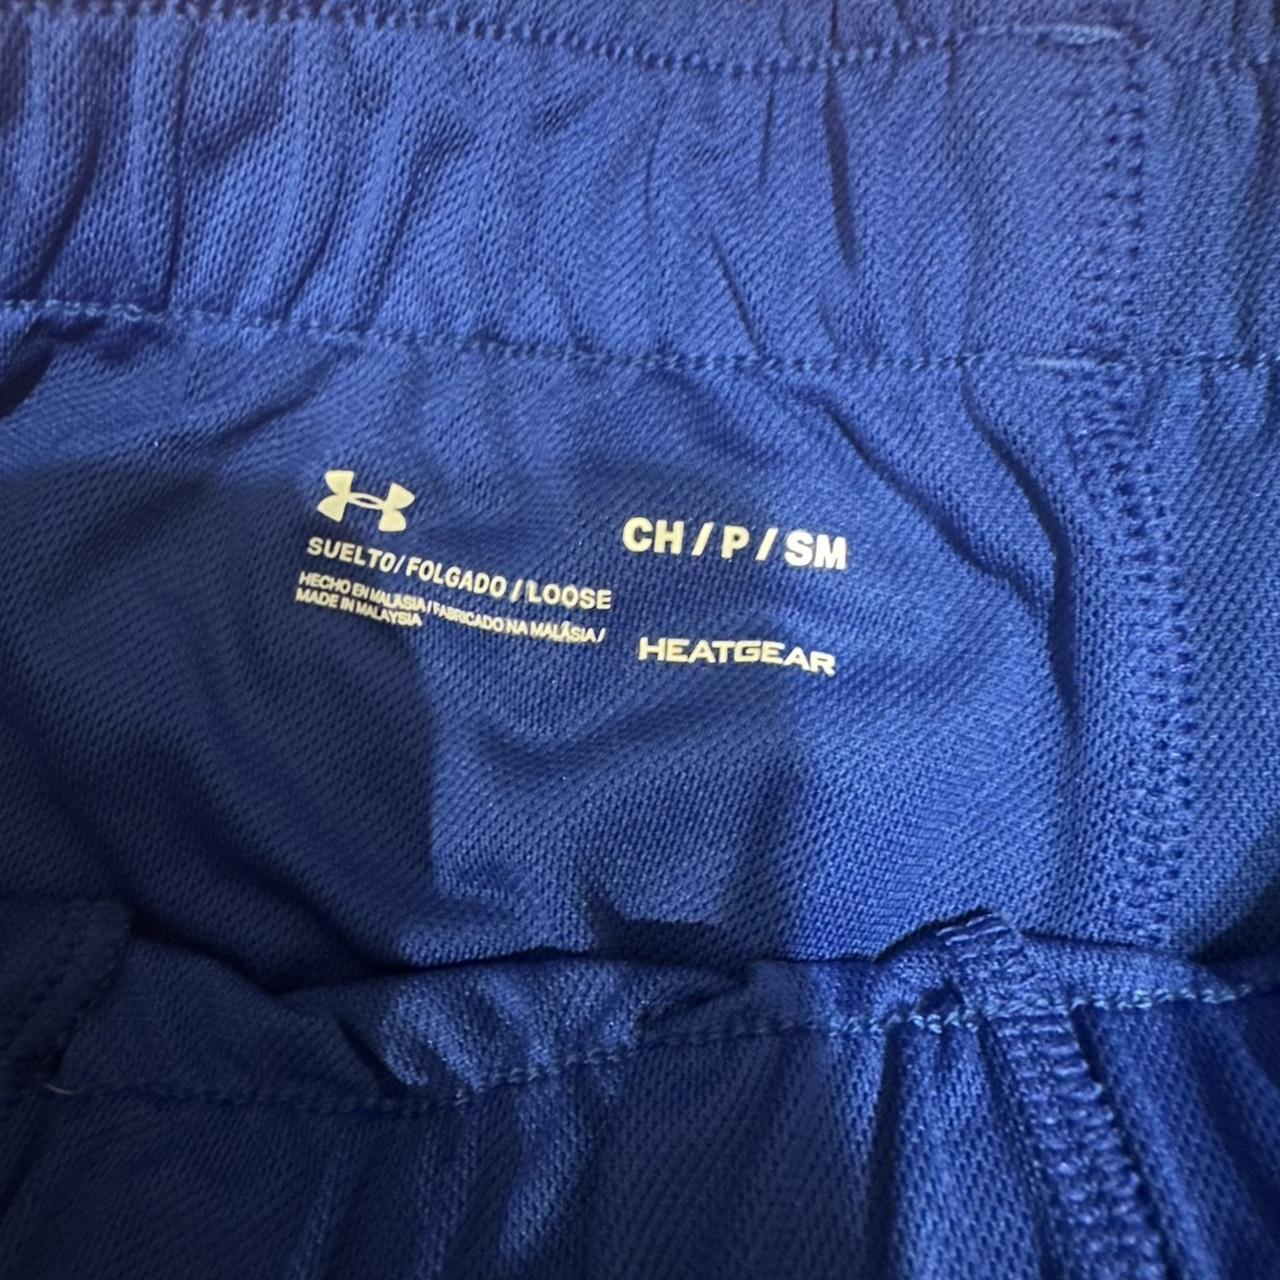 Under Armour Shorts - New without tags - Has pockets - Depop